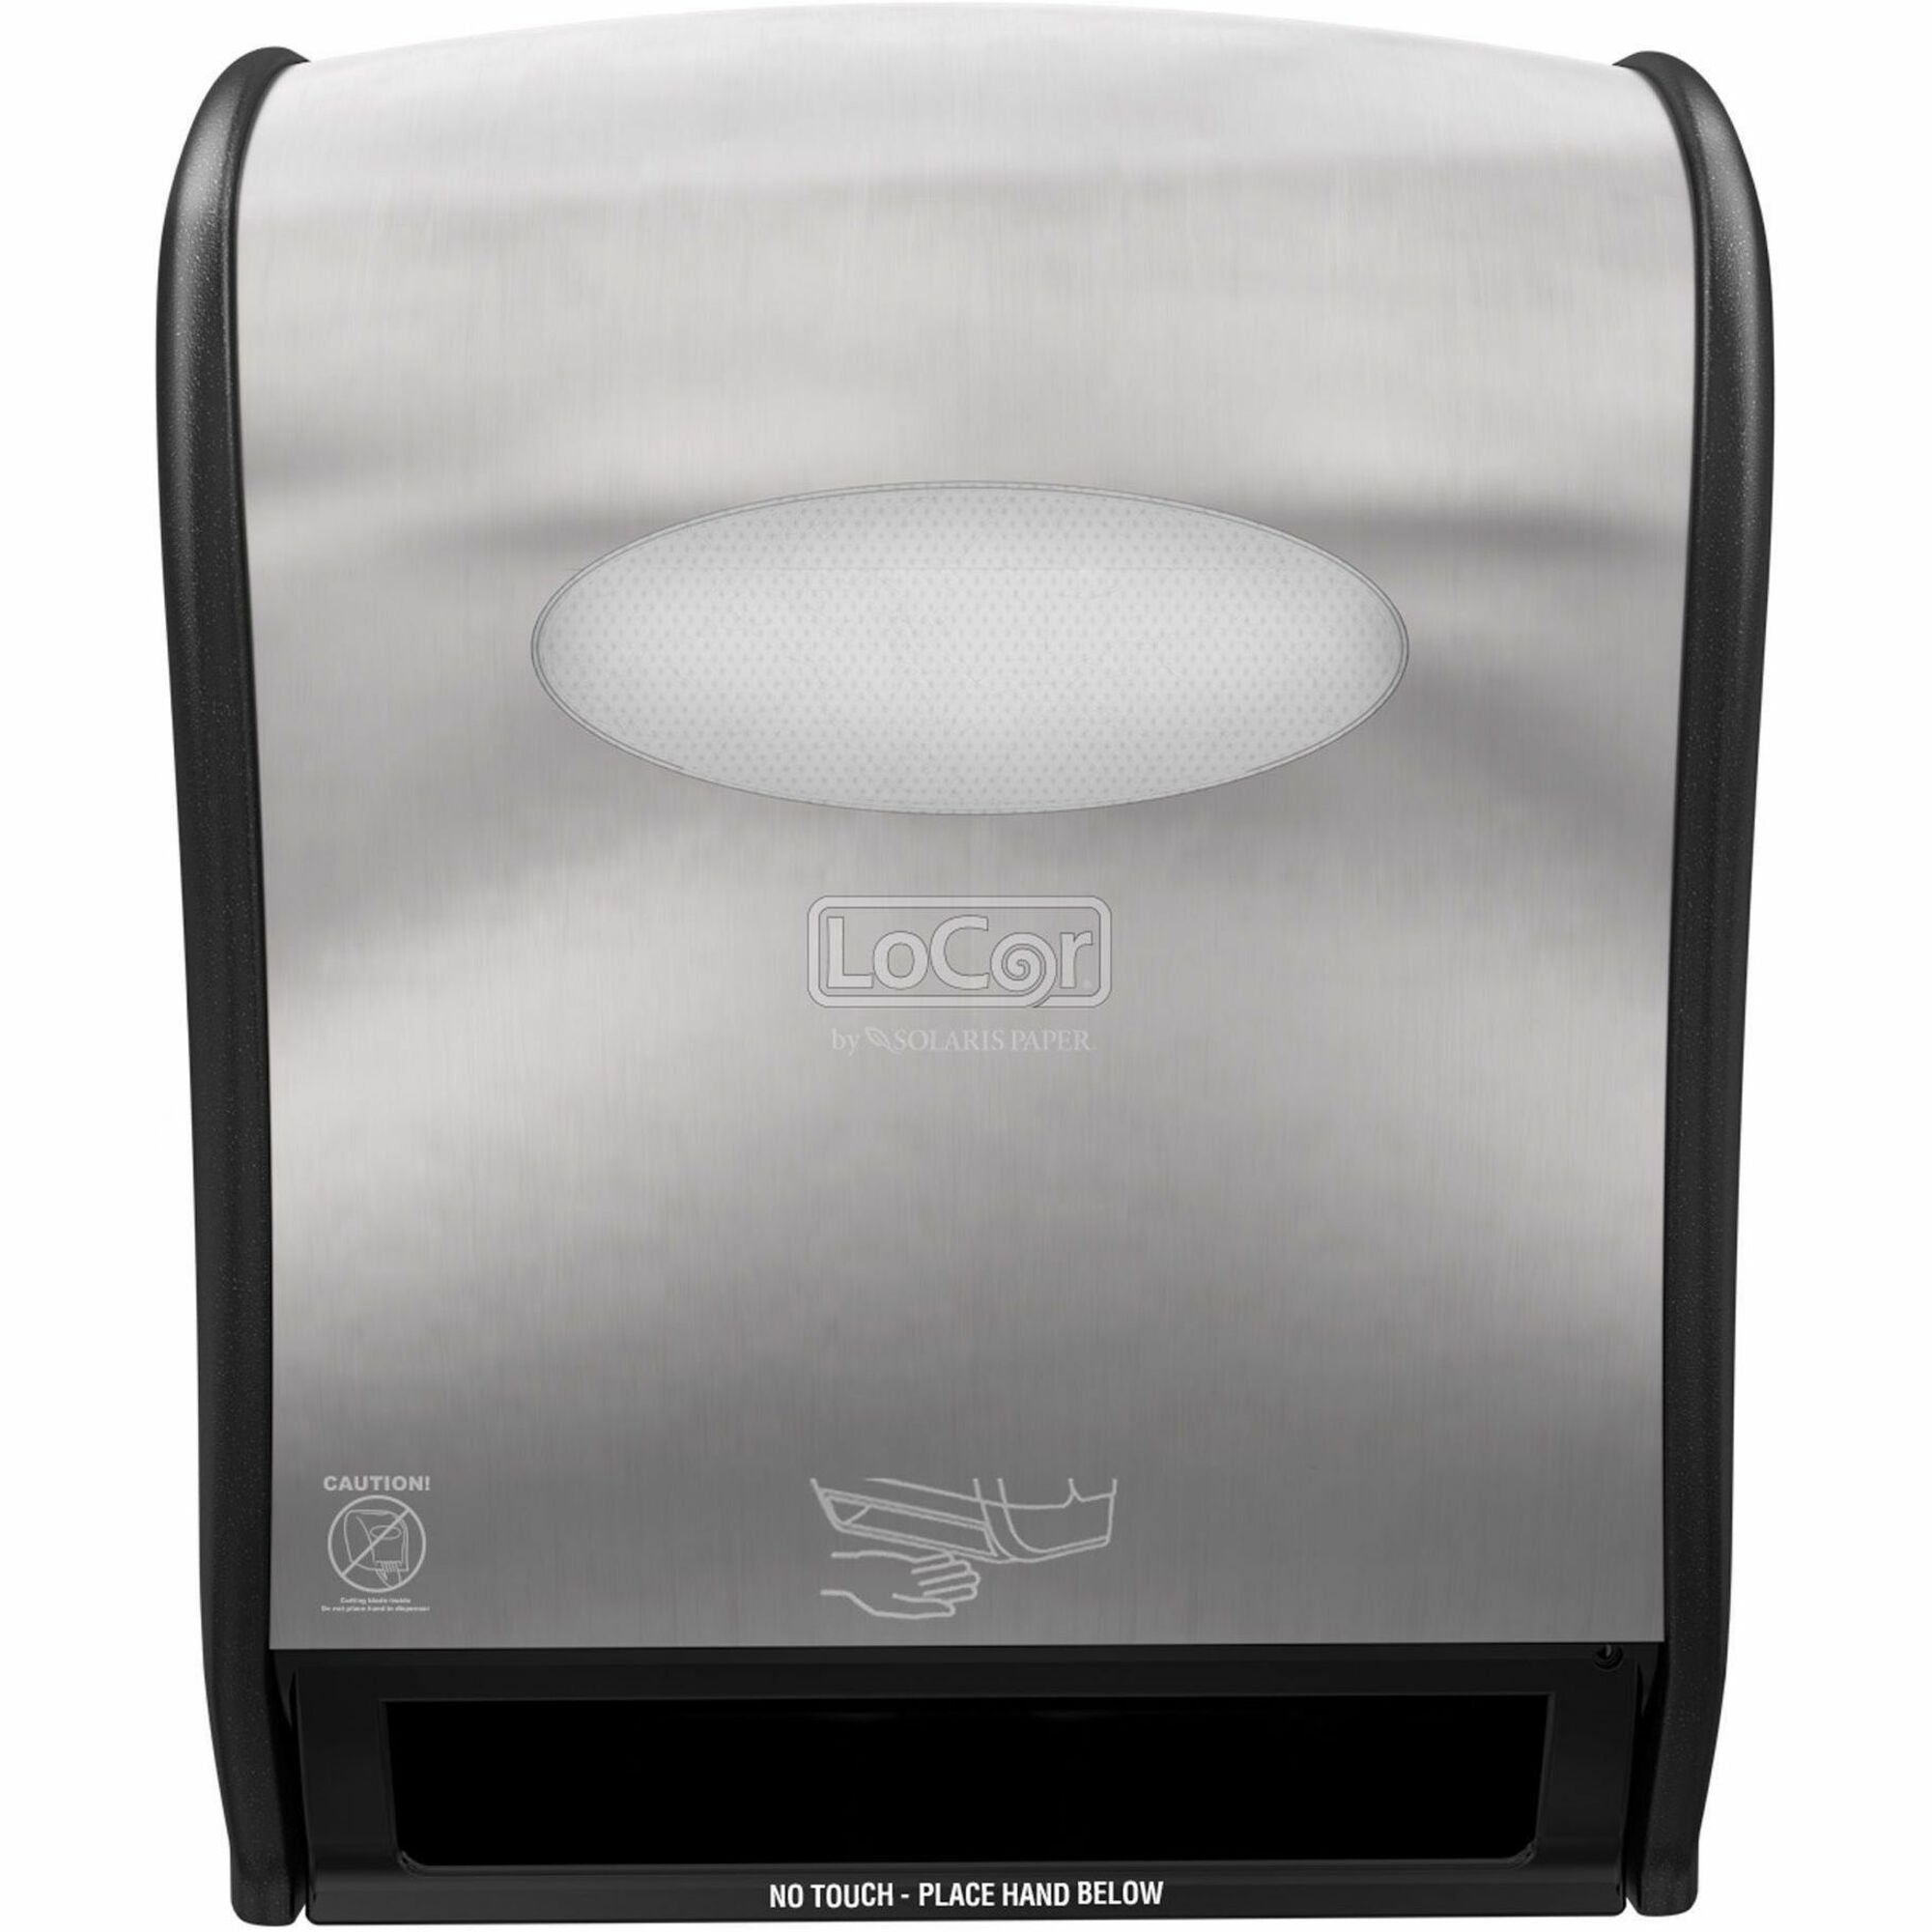 LoCor Electronic Hardwound Towel Dispenser - Touchless Dispenser - 10.2" Height x 13.6" Width x 16.4" Depth - Stainless - 1 Each